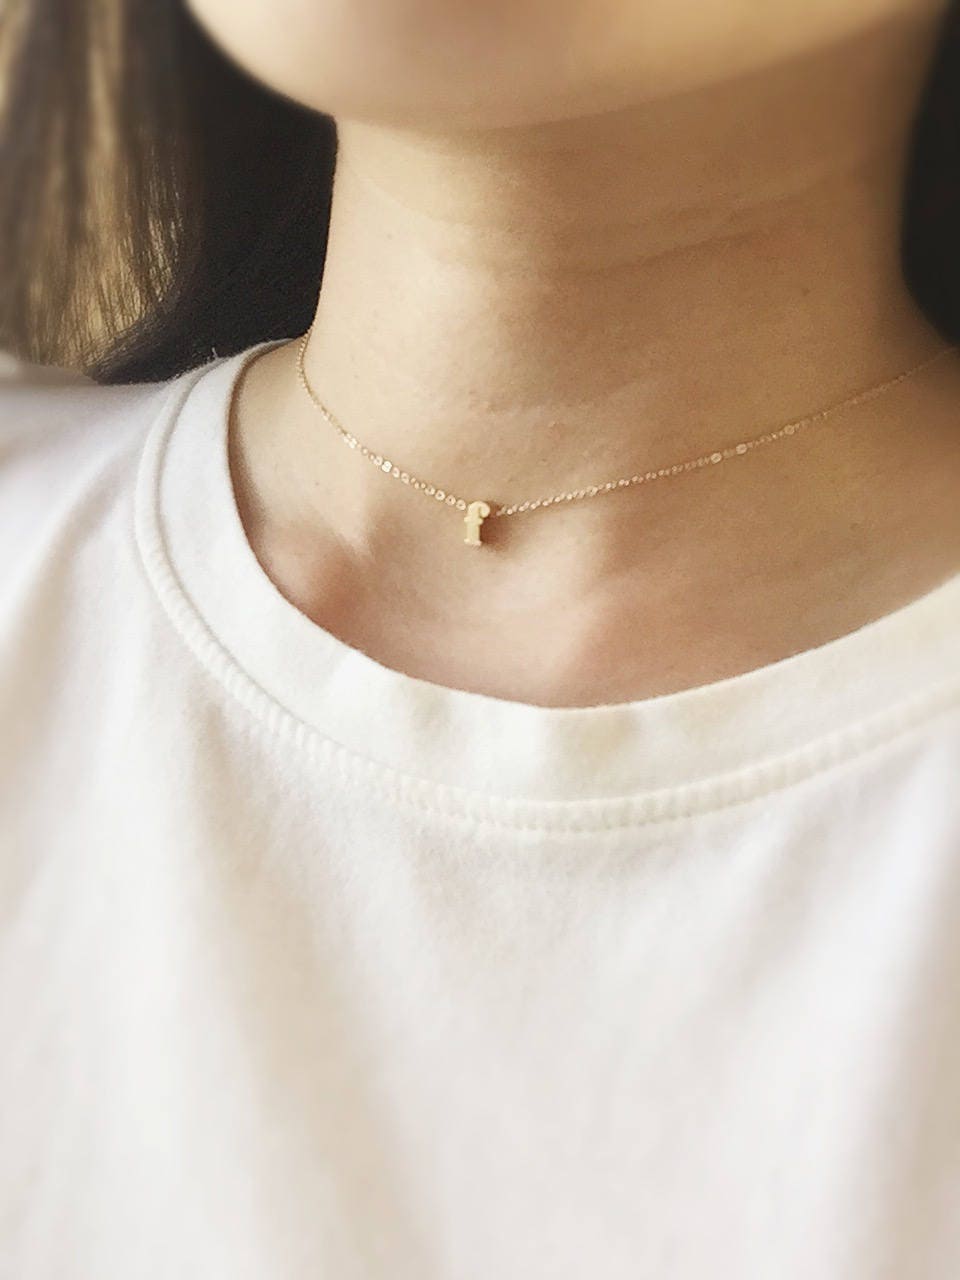 Dainty Choker Necklace - Tiny Alphabet Necklace/ Gold Initial Necklace/ Personalized Choker/ Gold Choker/ Initial Choker/ Layering Necklace